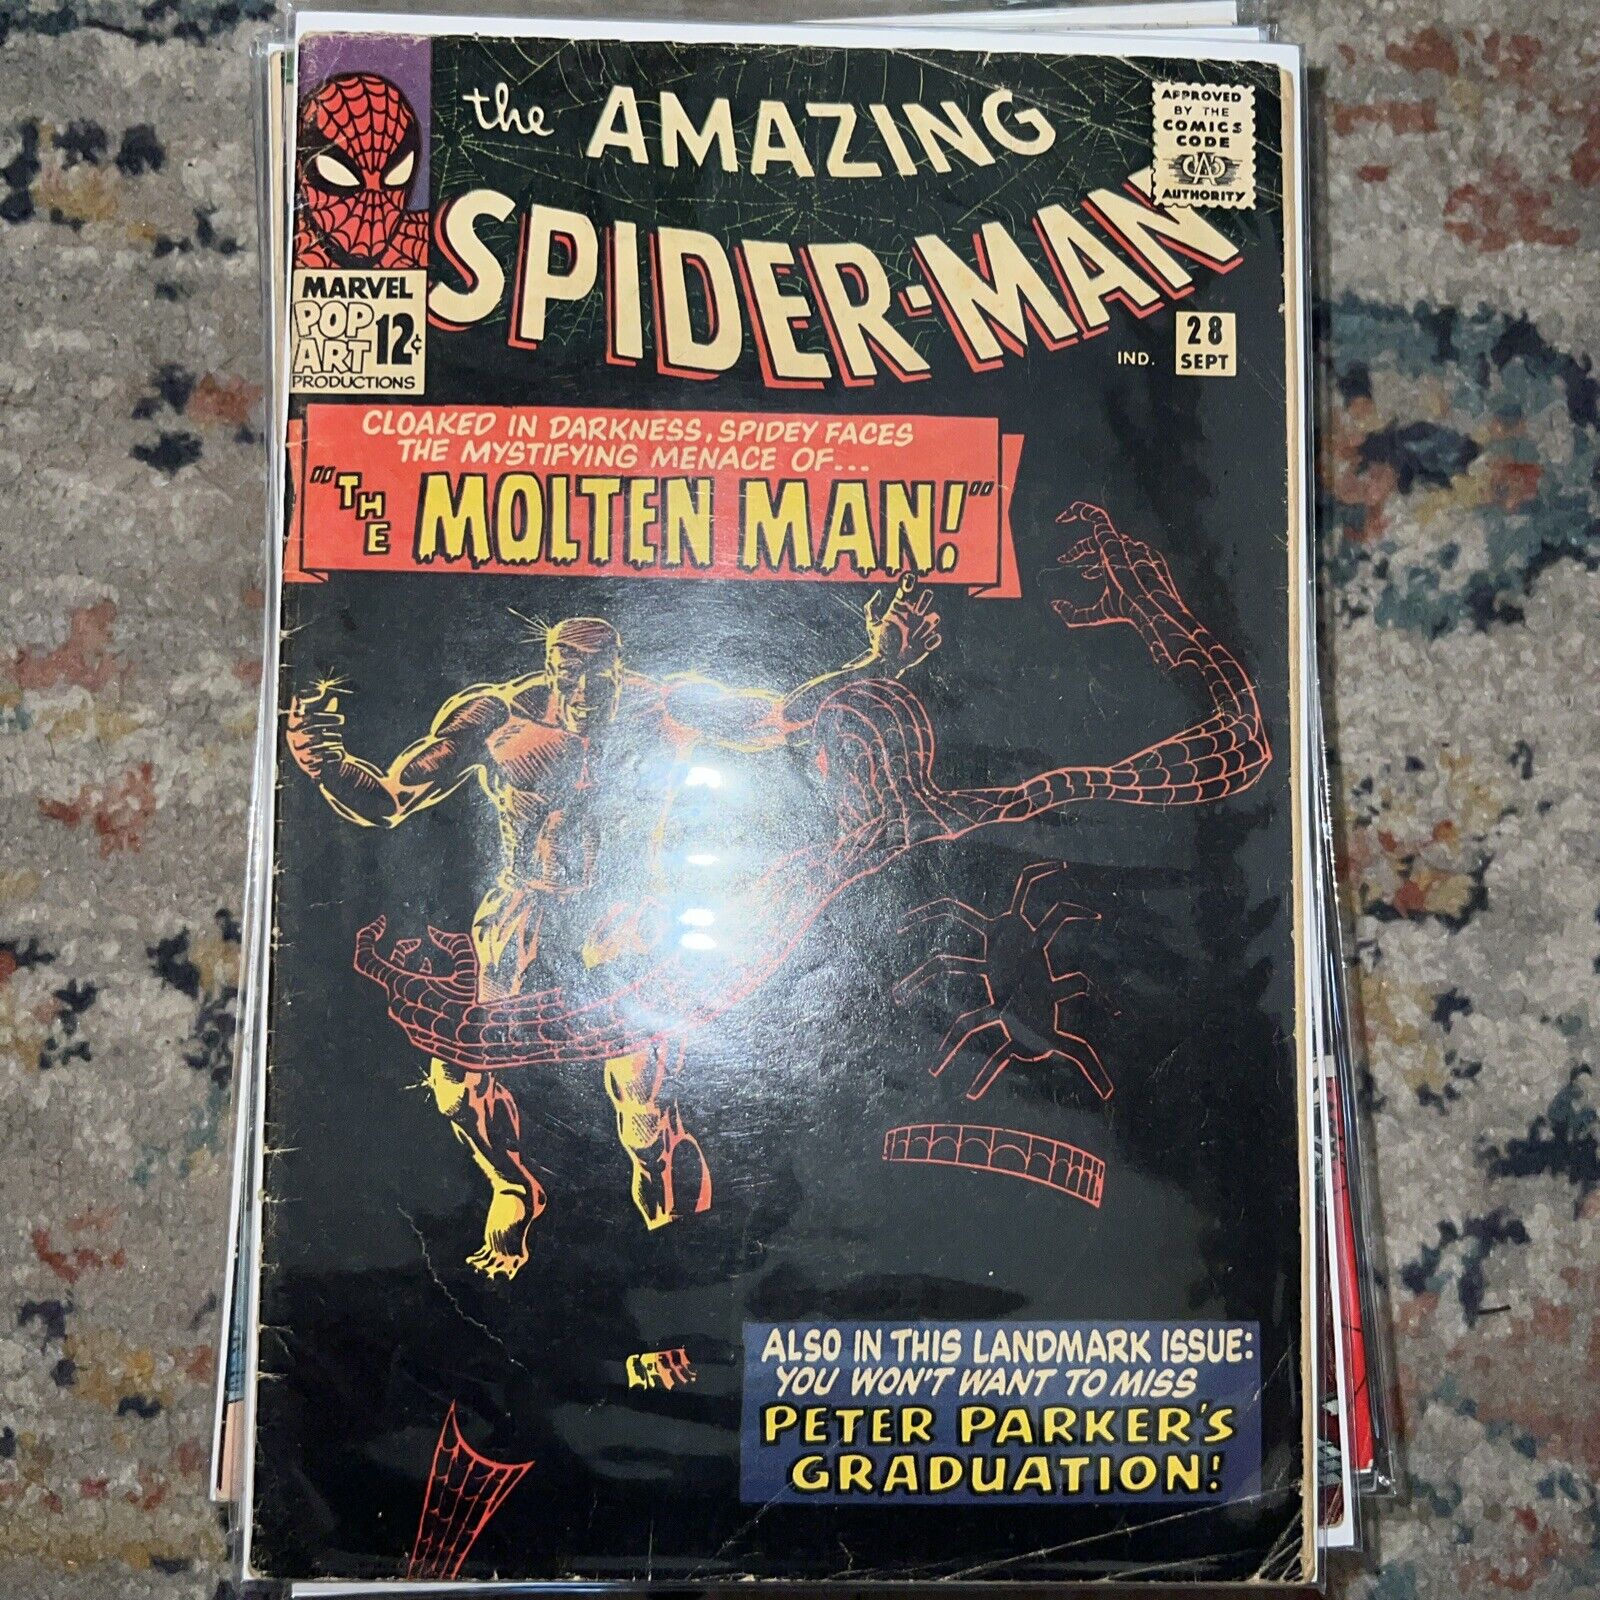 AMAZING SPIDER-MAN #28 (1965)  1ST APPEARANCE OF MOLTEN MAN